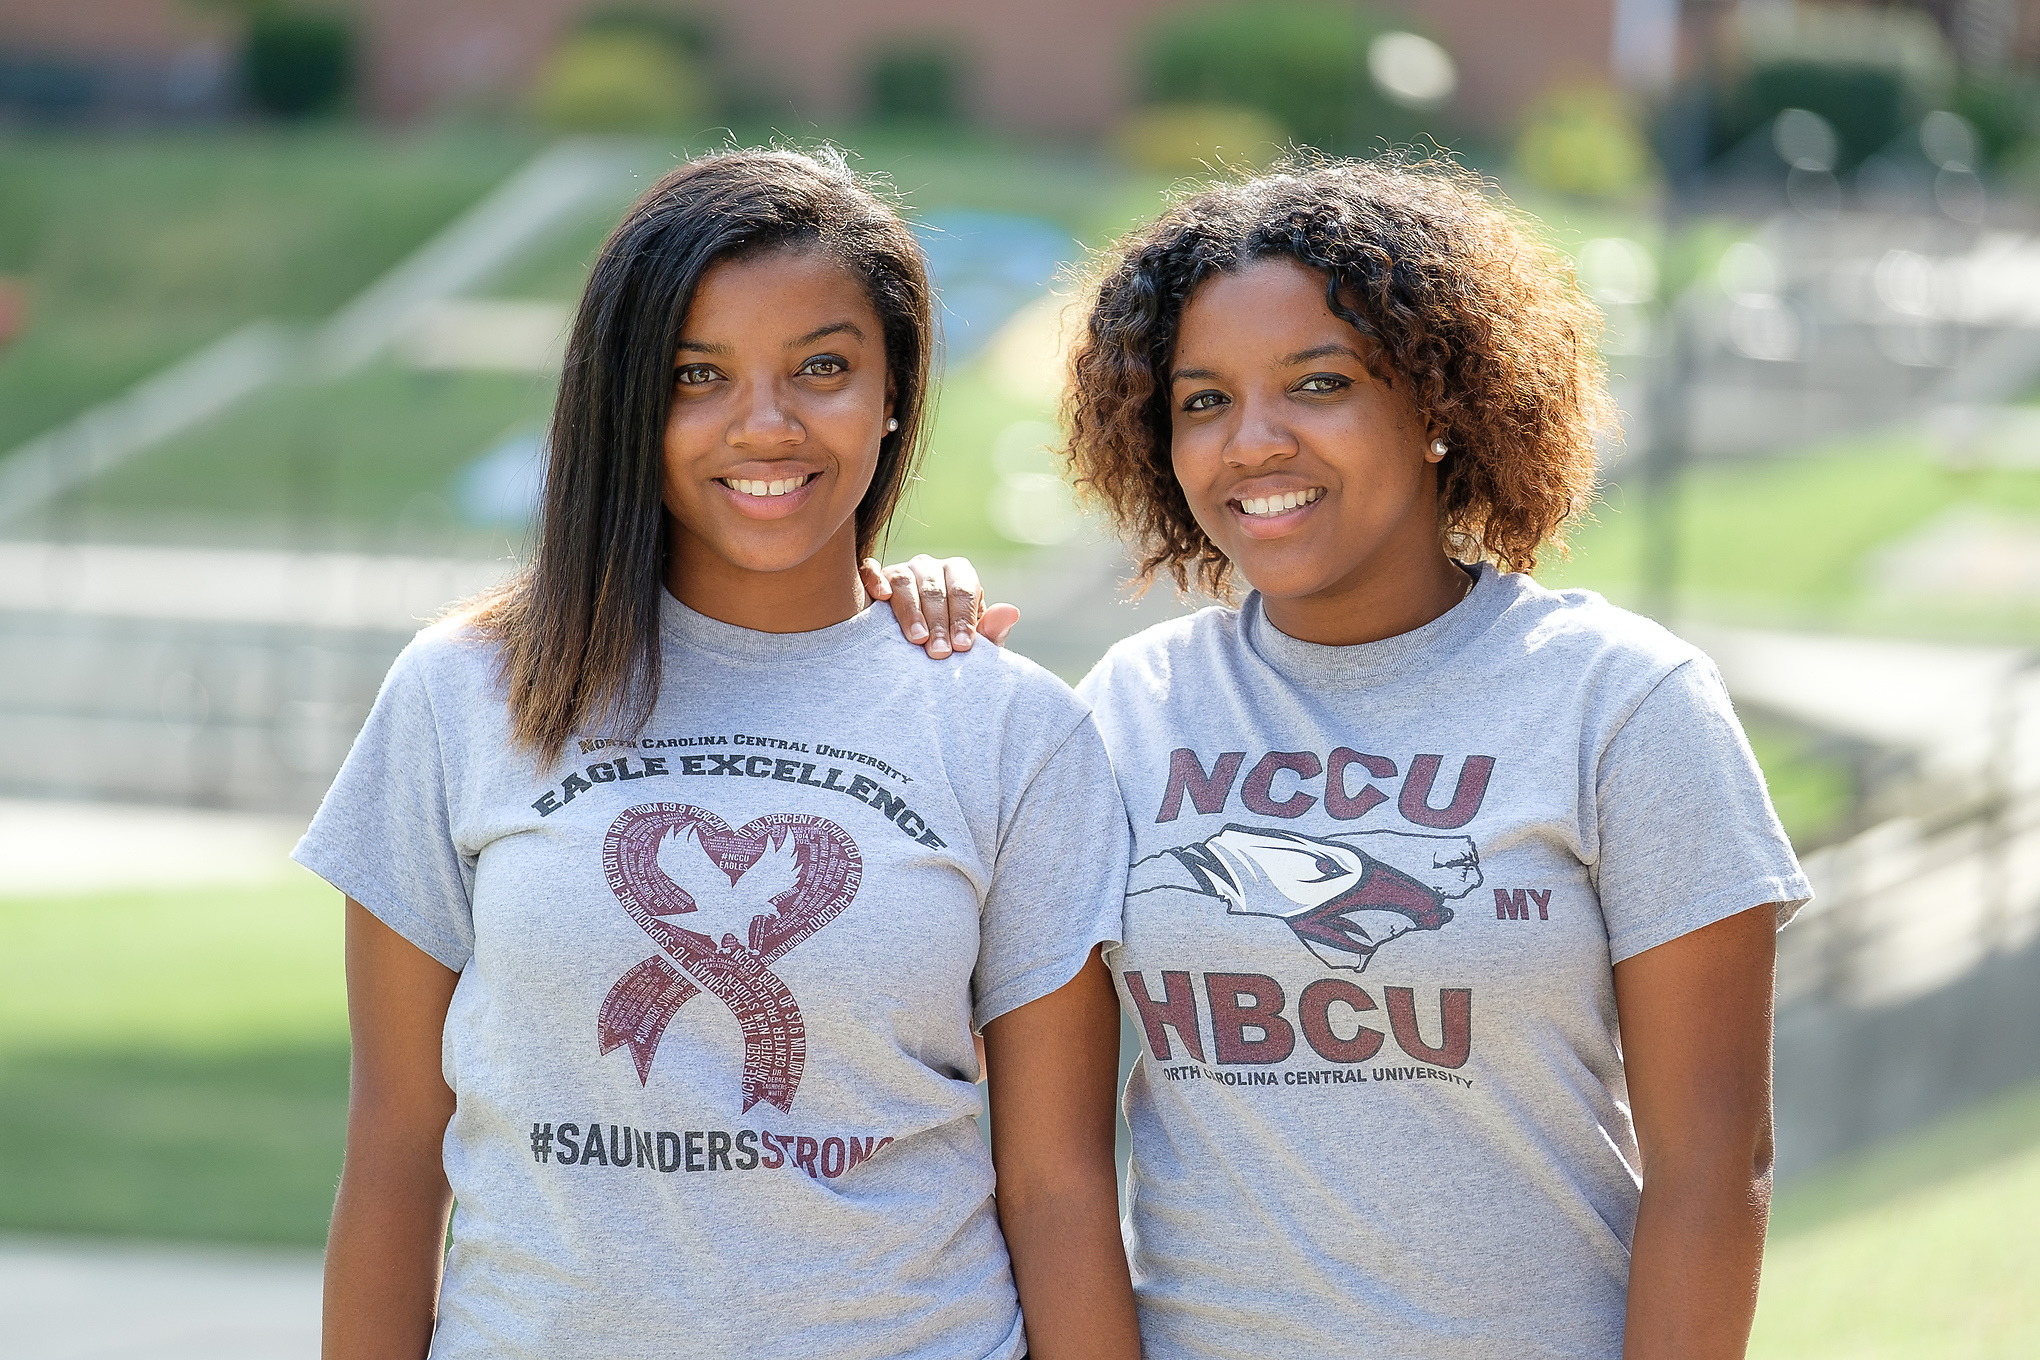 Two NCCU students standing outside looking into the camera.